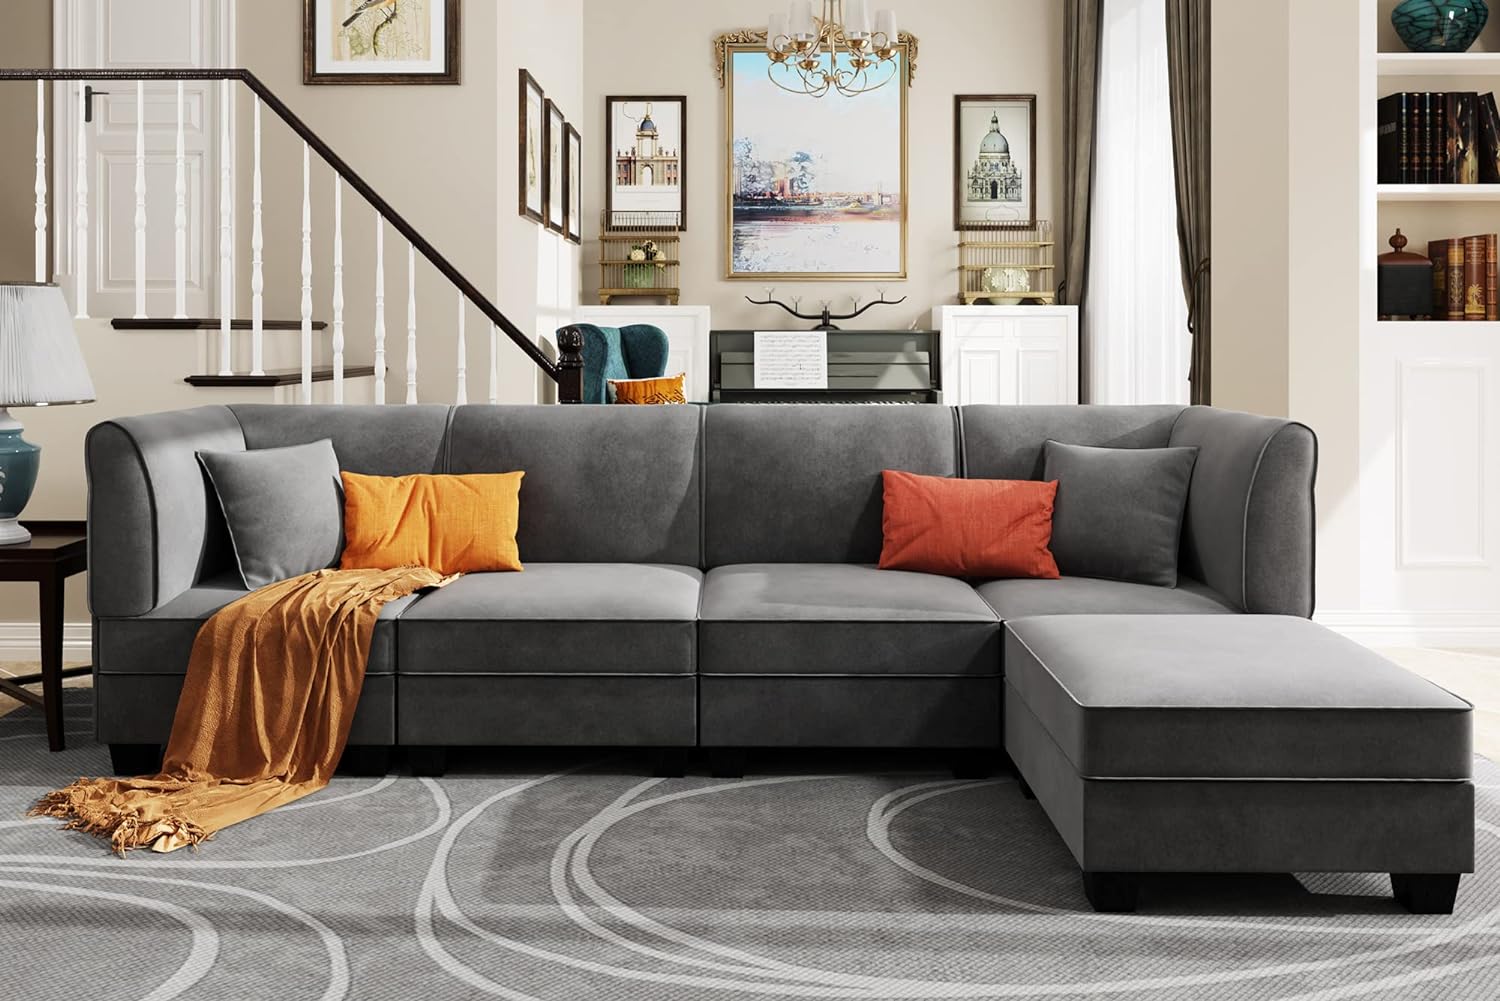 A modern living room features a gray sectional sofa adorned with orange and gray throw pillows. A mustard-yellow throw blanket is draped over one end. The background includes framed artwork, a staircase with a white railing, built-in shelves, and elegant decor.